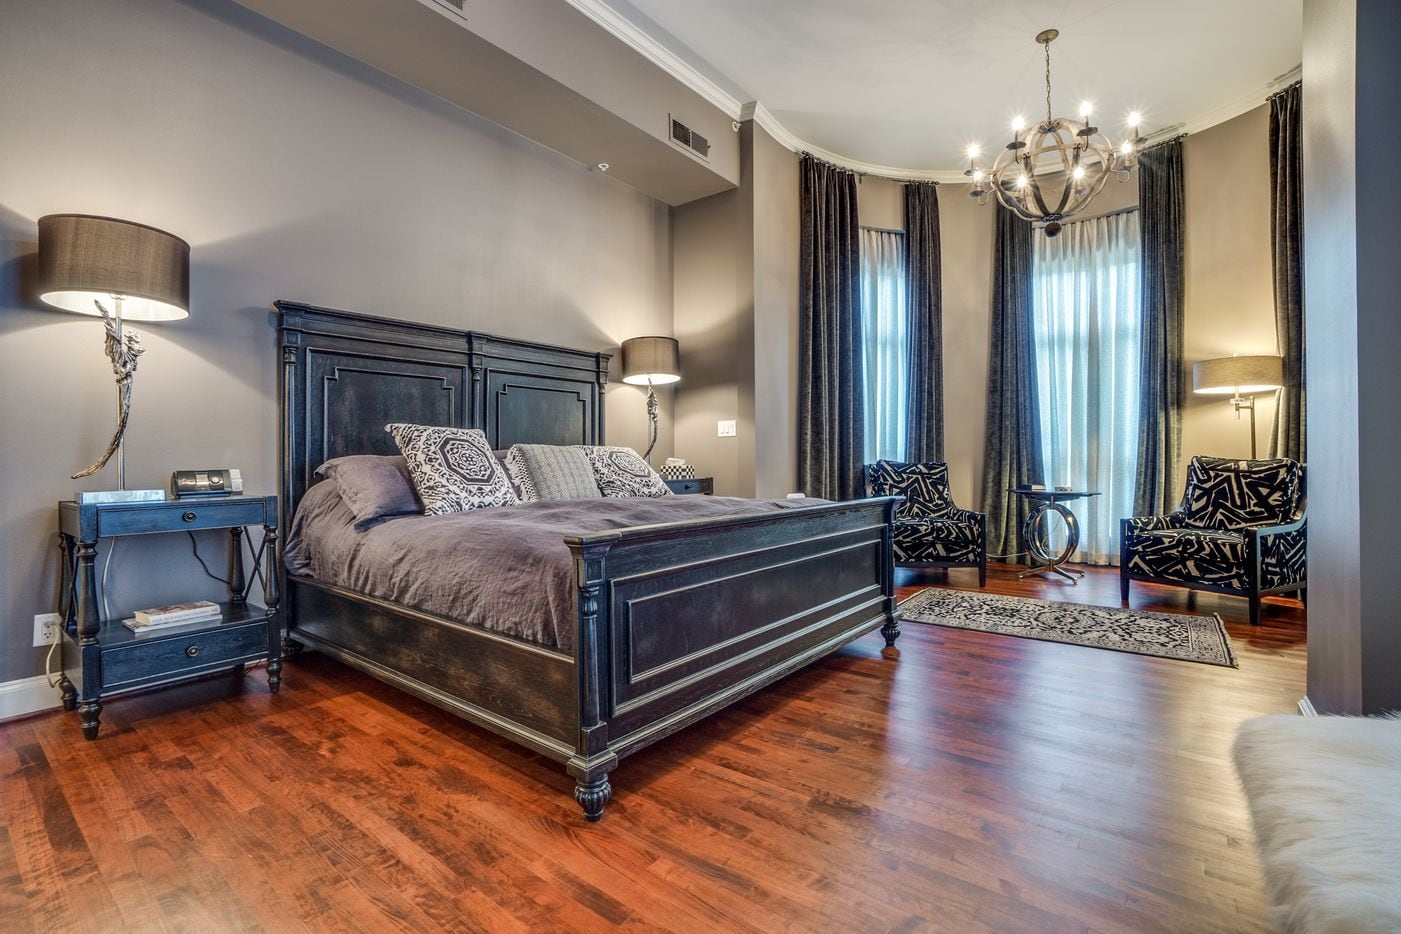 Take a look at the interior of 3401 Lee Parkway, Unit 3A at The Mayfair in Dallas, TX.